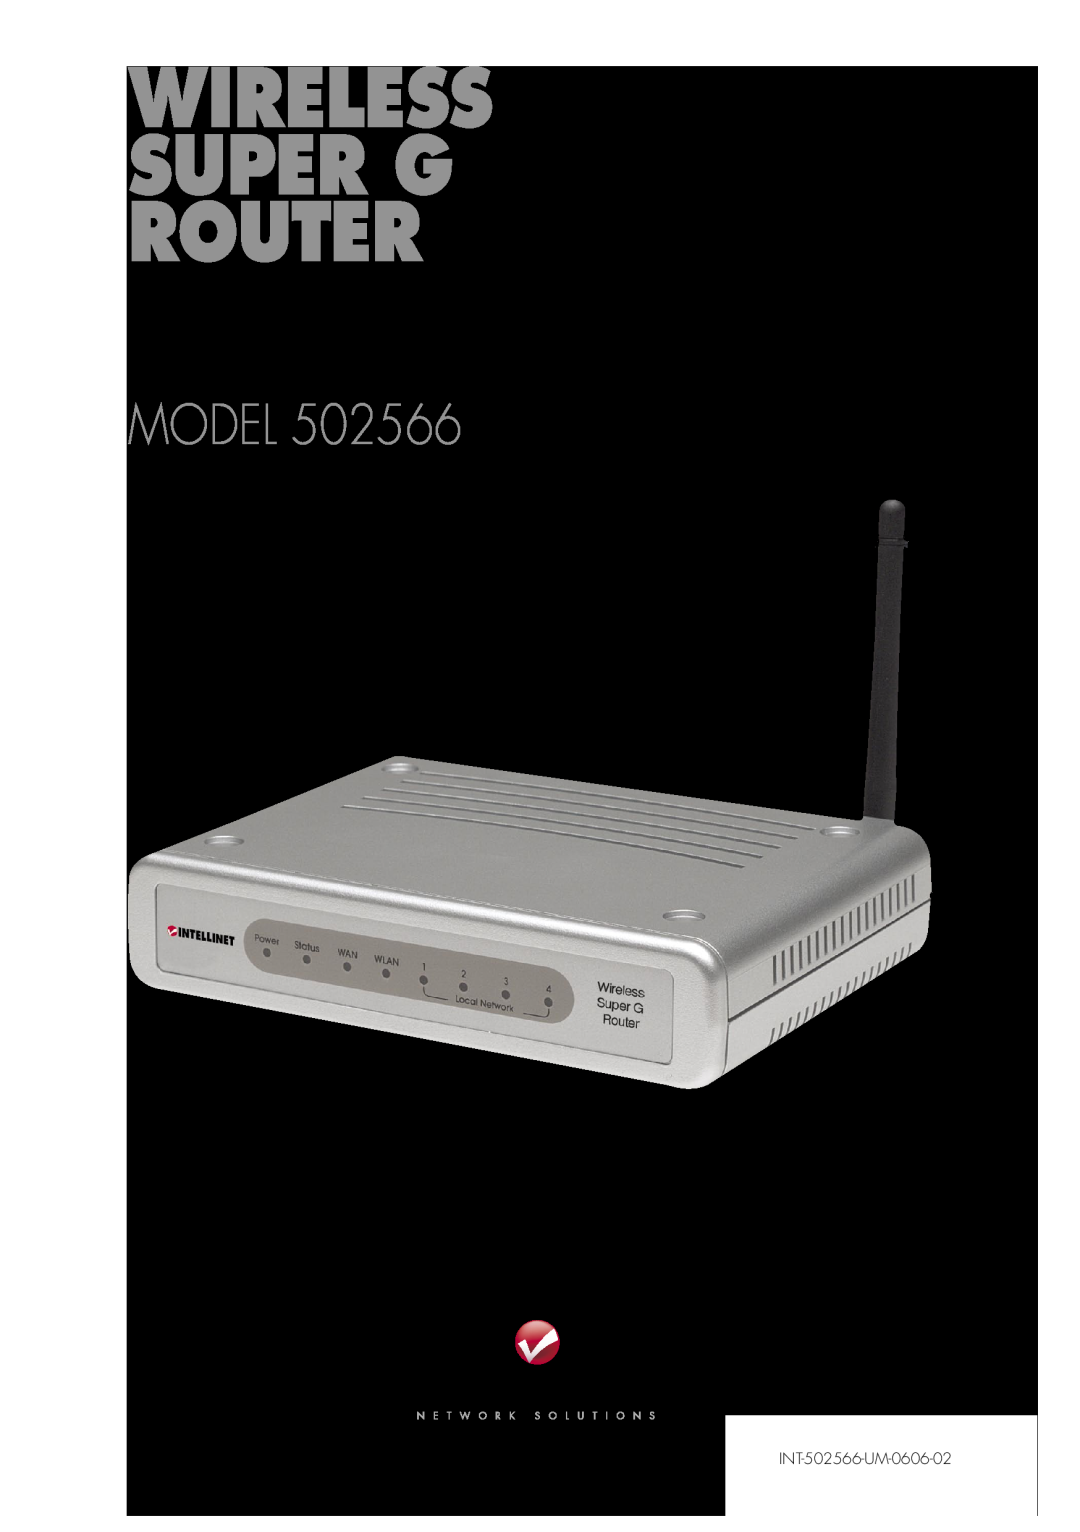 Intellinet Network Solutions manual Wireless Super G Router User Manual, Model, INT-502566-UM-0606-02 